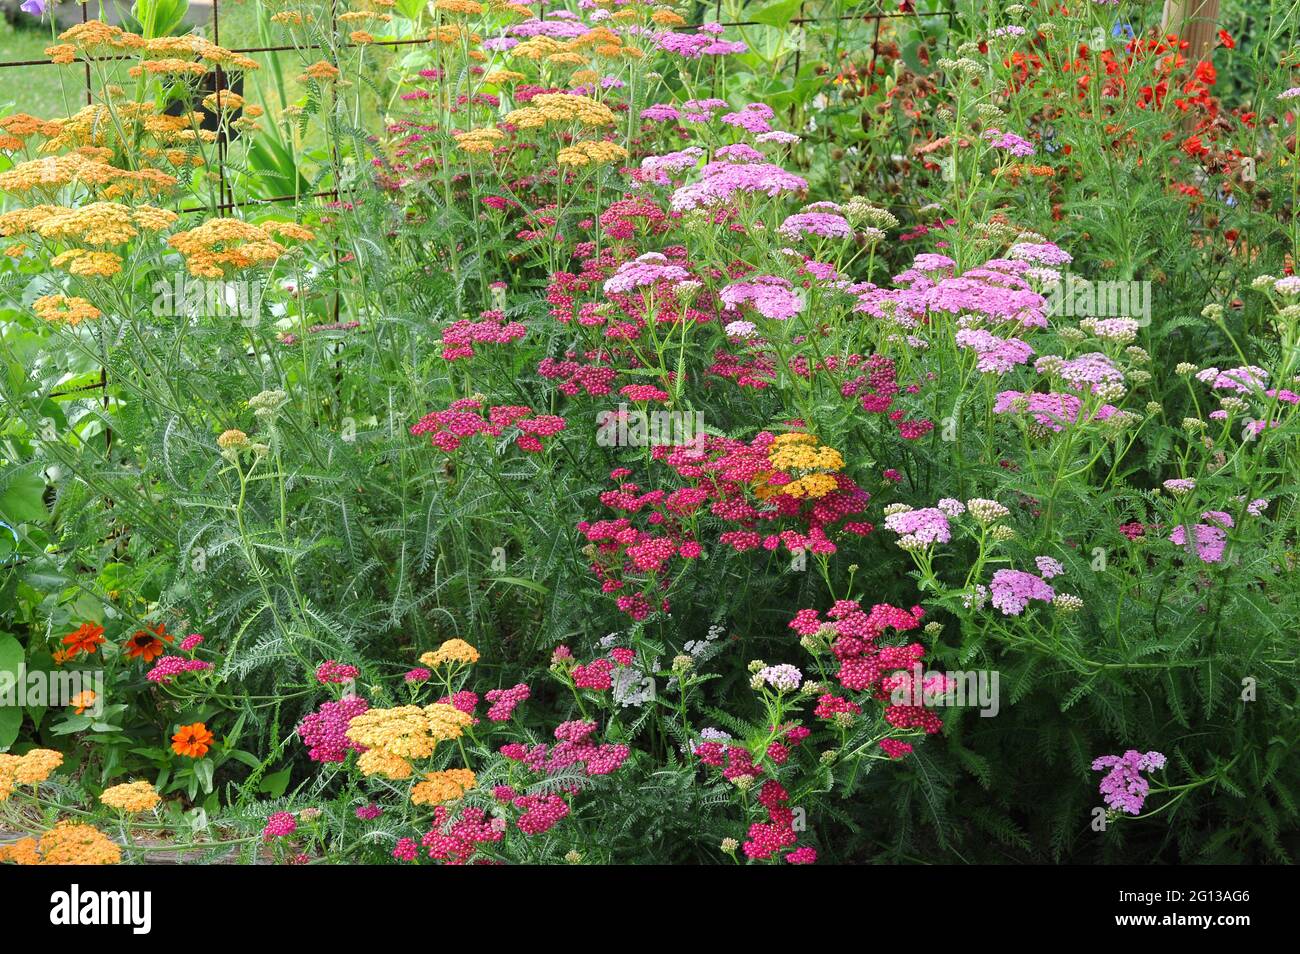 Yarrow (Achillea millefolium) ornamental varieties. Yarrow is an herbaceous perennial plant native to Europe, Asia and North America. This photo was Stock Photo